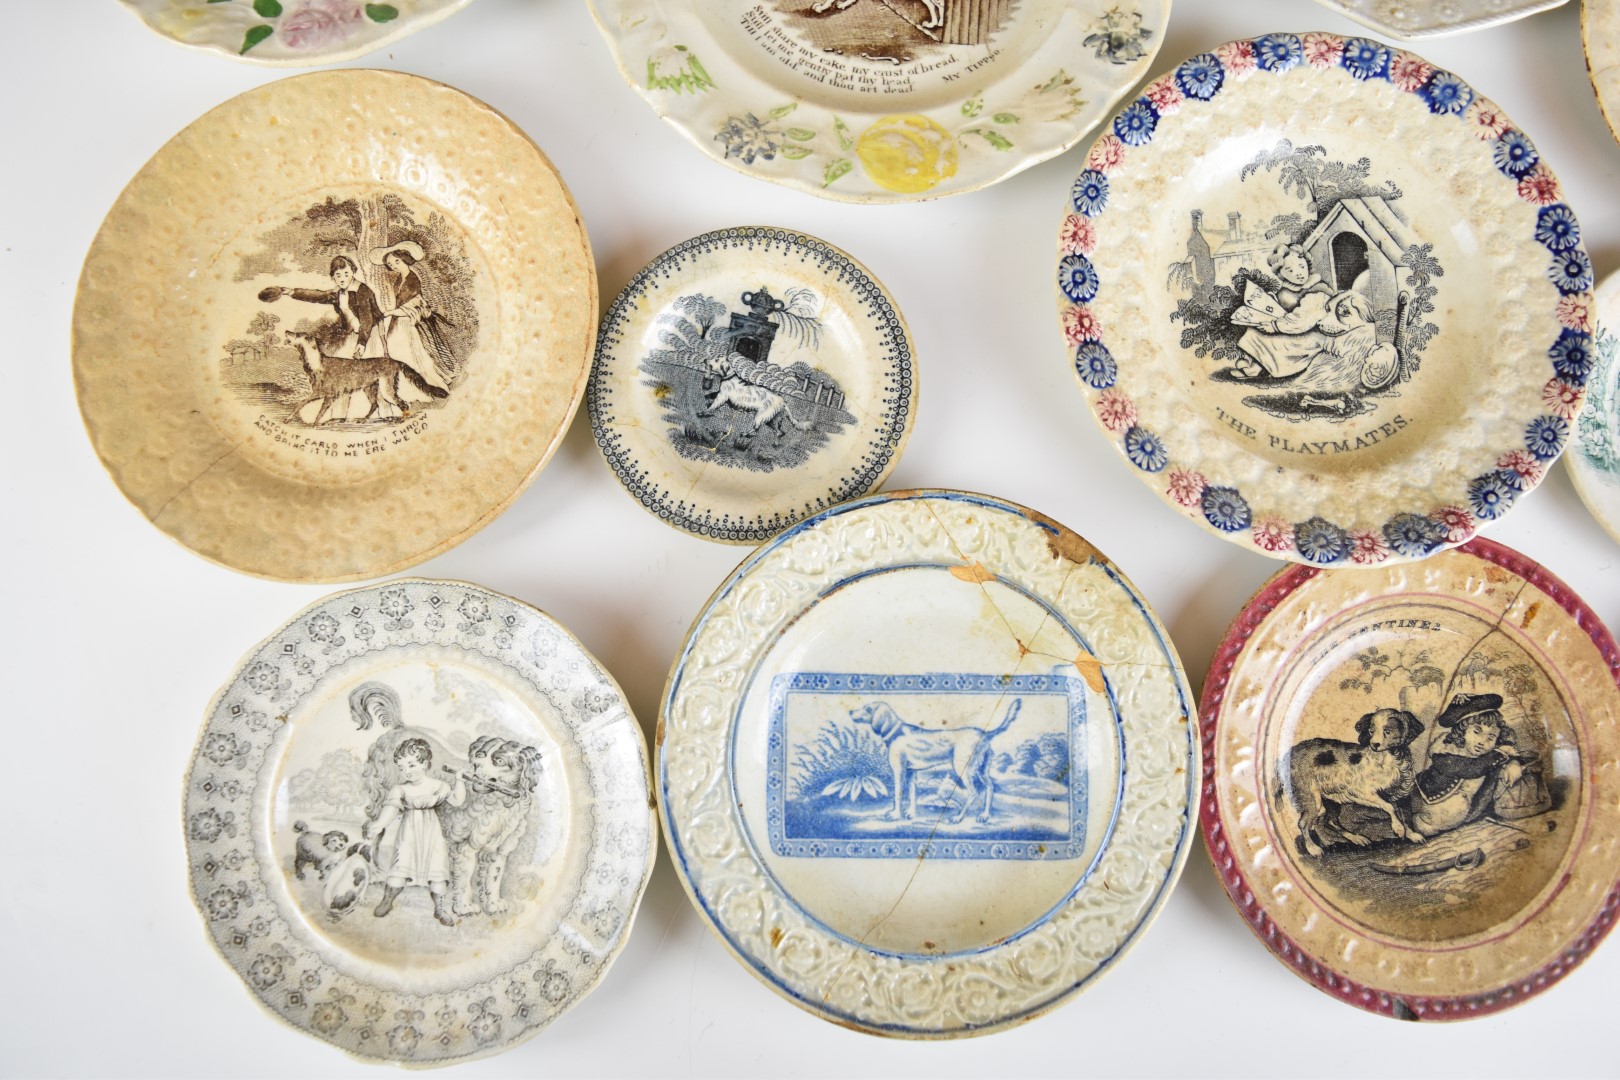 19thC nursery ware plates, mostly featuring dogs / children including The Pet, A Presant, Juvenile - Image 3 of 7